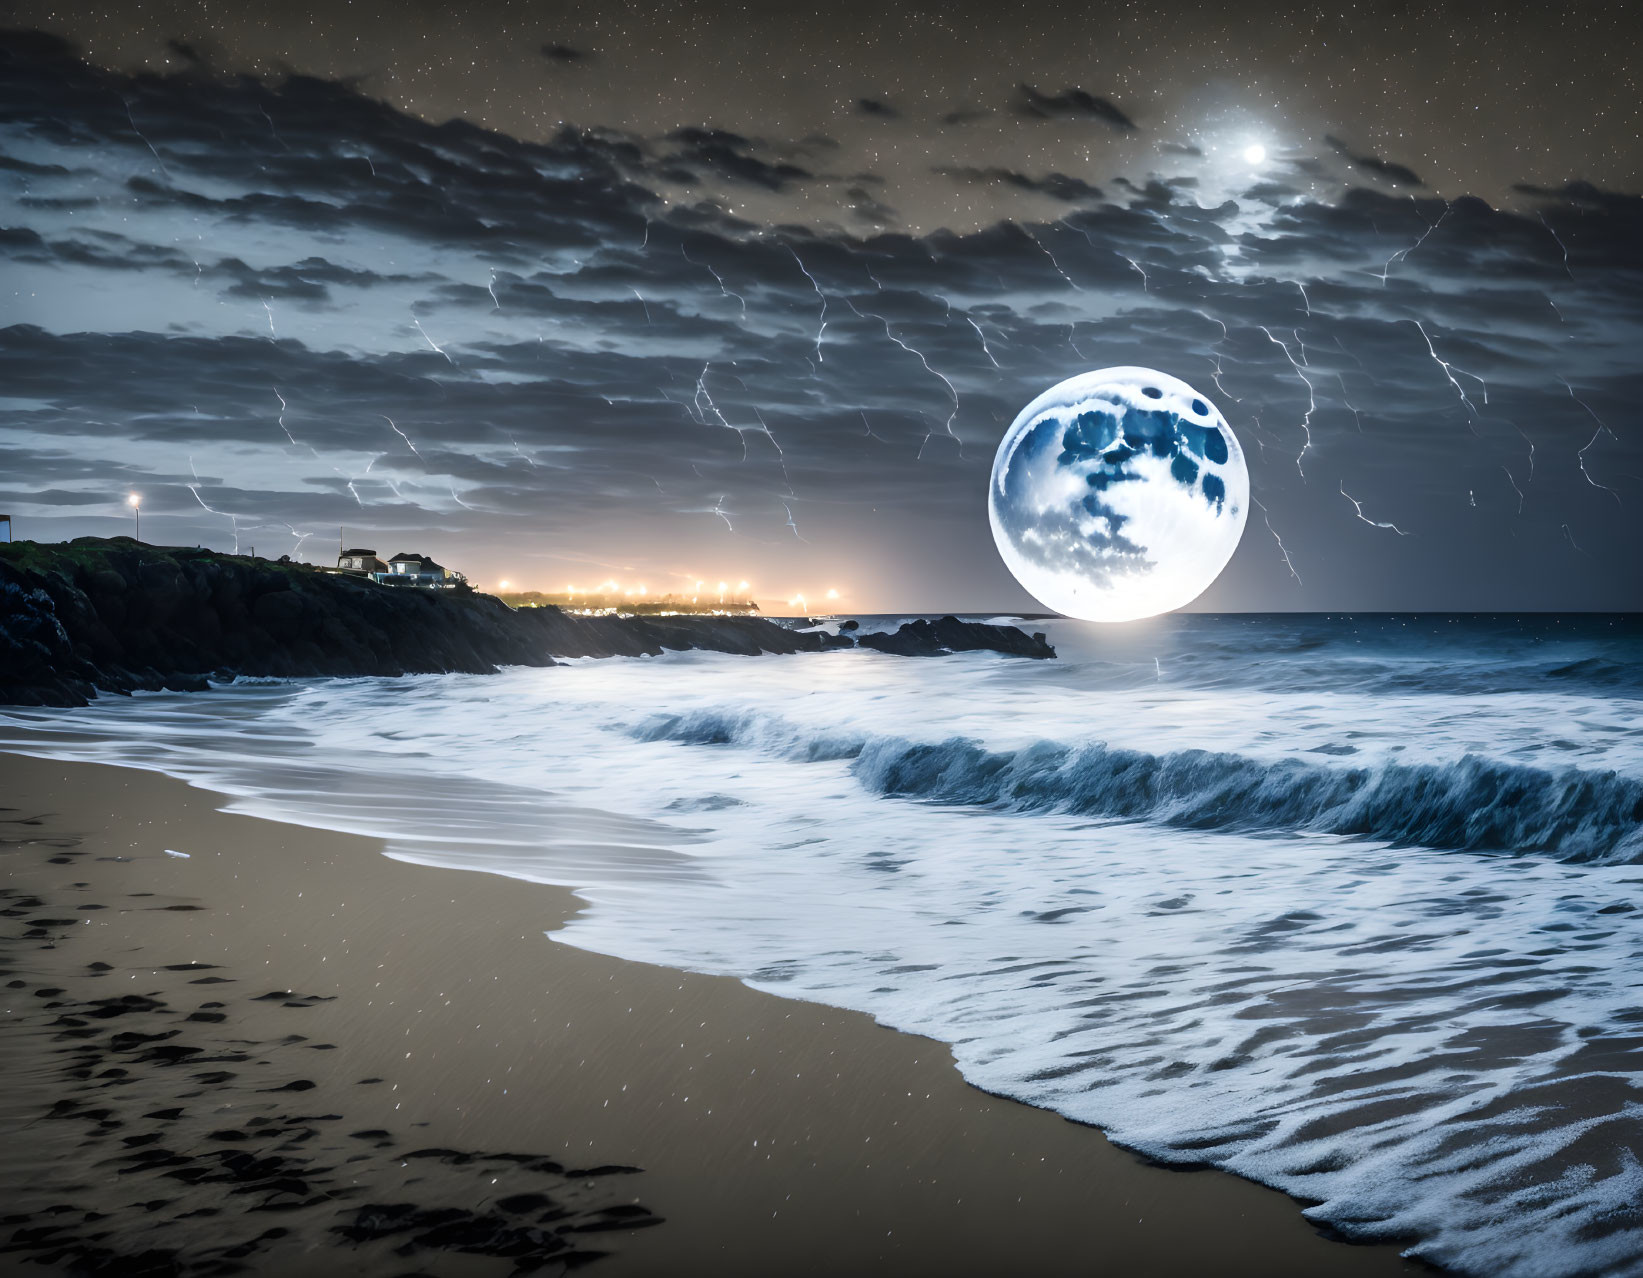 Surreal moon over nighttime beach with lightning strikes